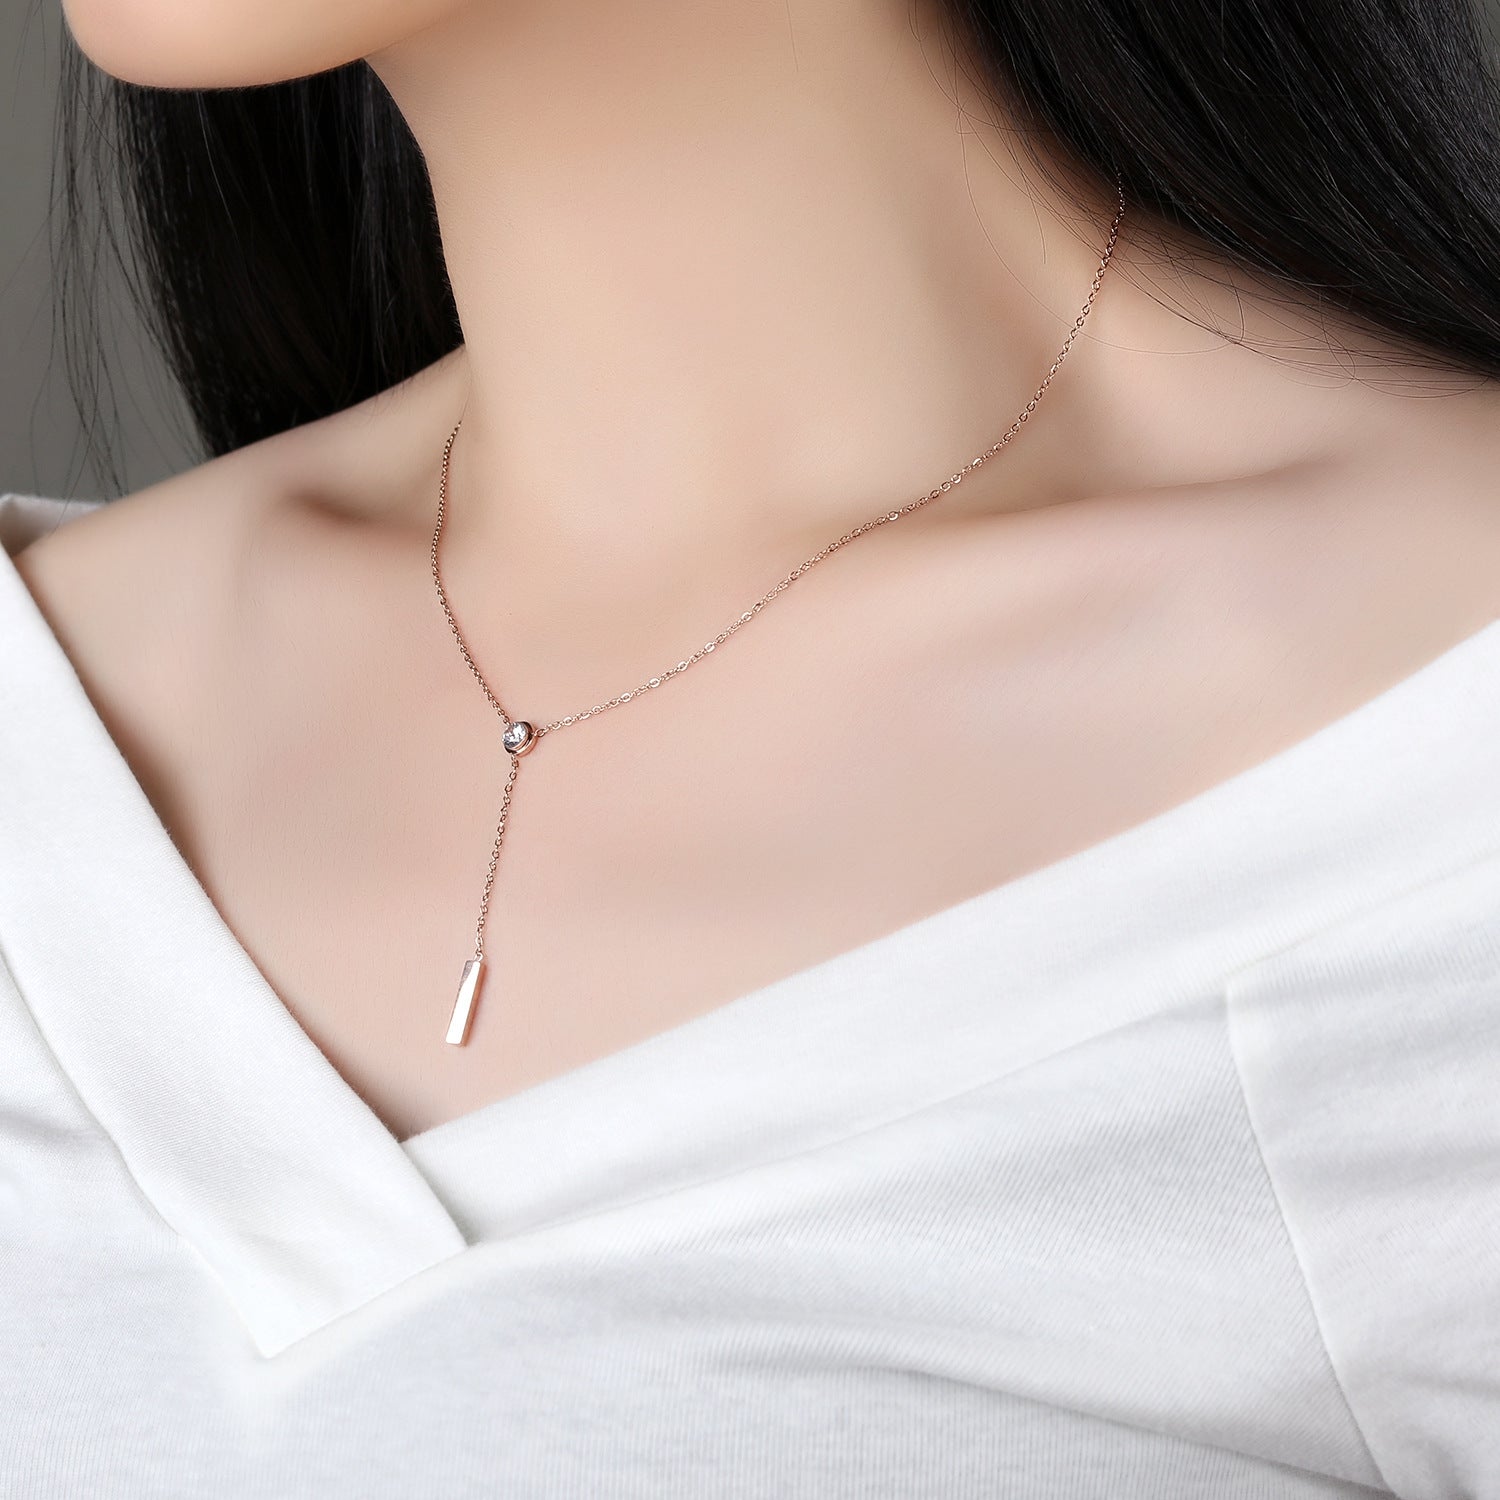 A woman wearing an elegant rose gold long necklace with a diamond